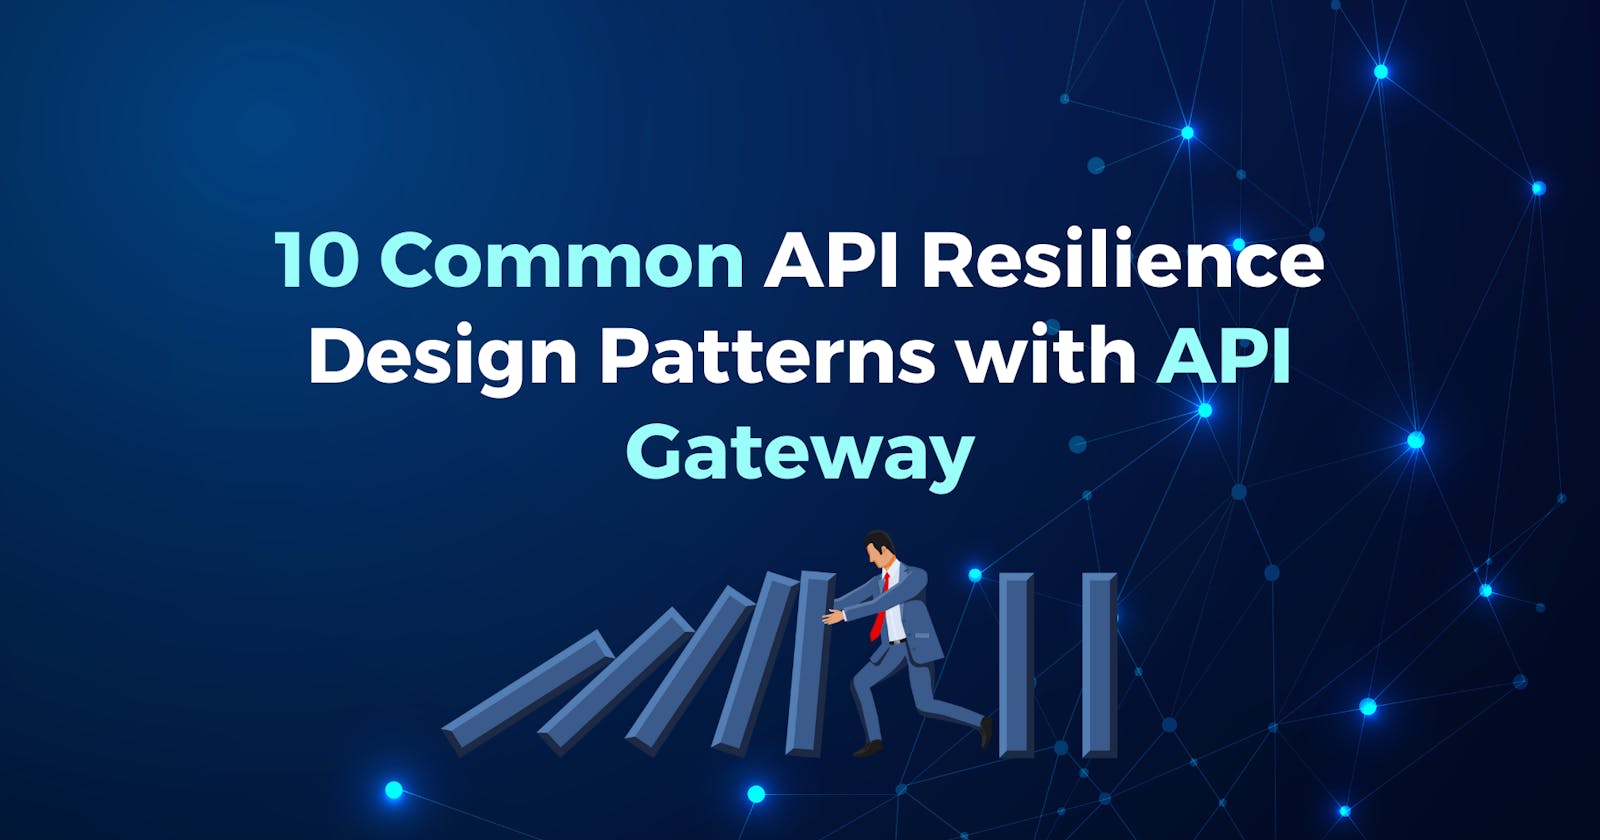 10 Common API Resilience Design Patterns with API Gateway